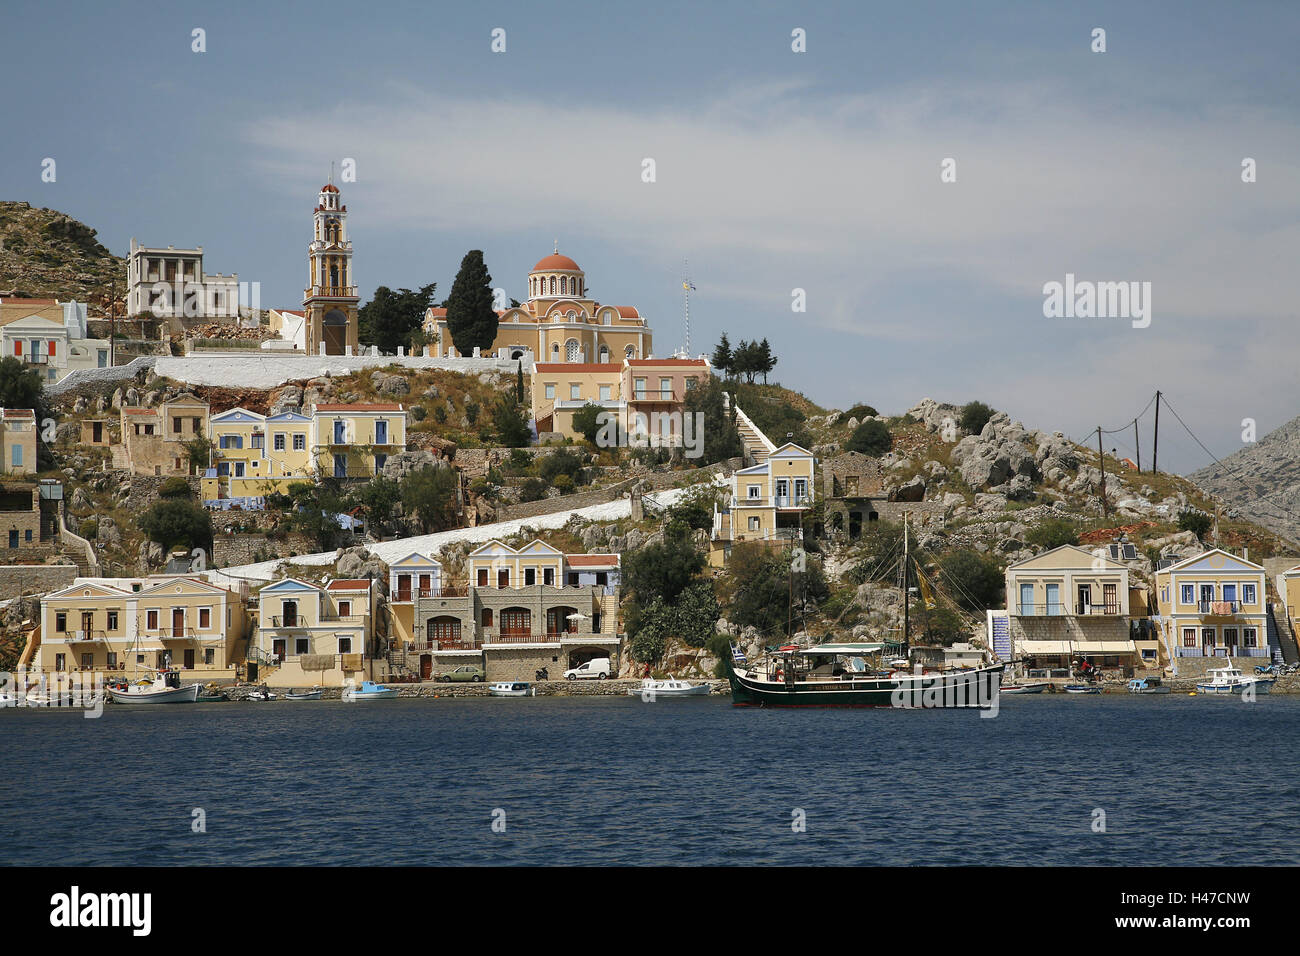 Greece, Dodekanes, Rhodes, island, Symi, harbour place Gialos, town view, church Evangelismos, sea, coast, seashore, coastal place, local view, Simi, town, island capital, hill, Symi town, houses, sacred construction, cloister, bell tower, tower, steeple, Stock Photo